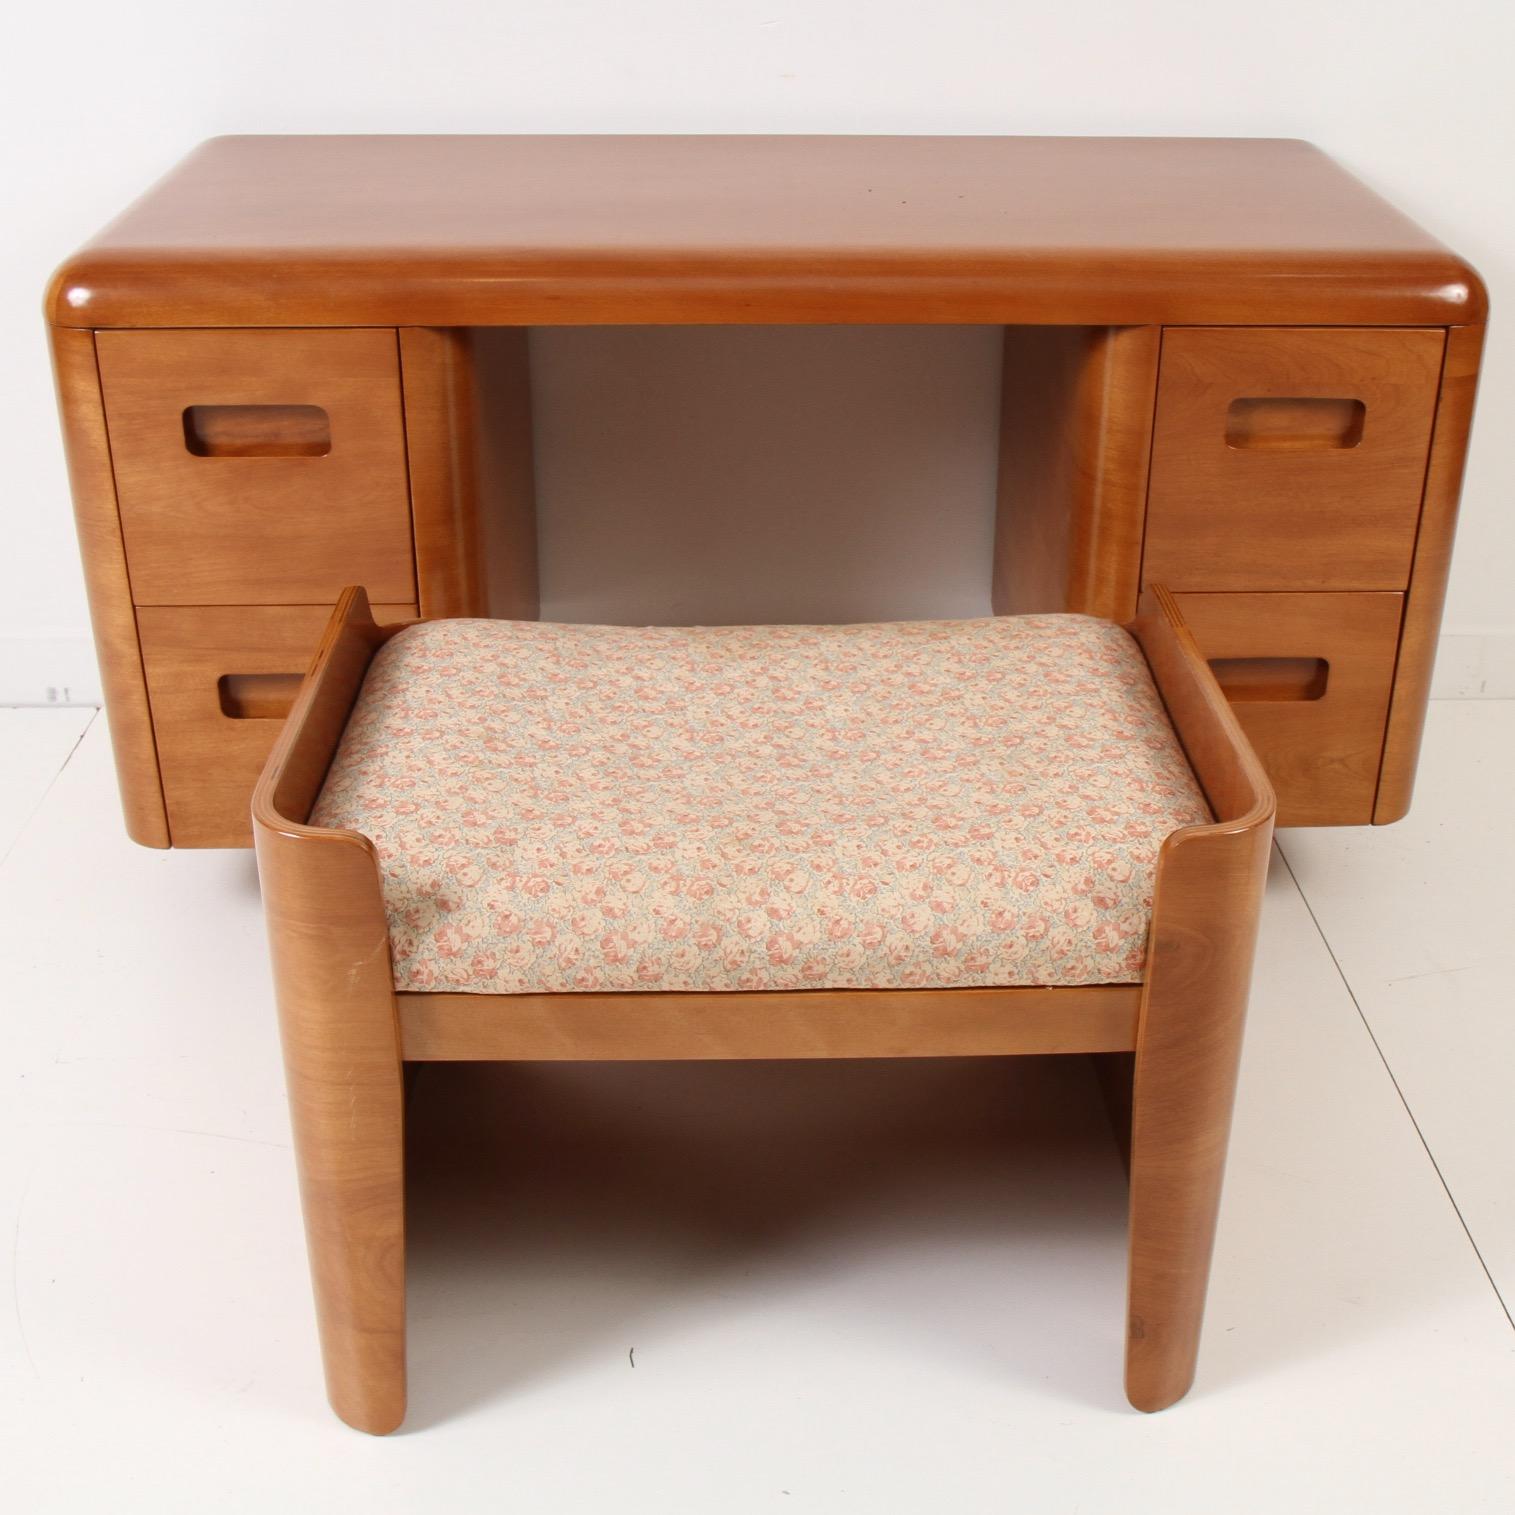 Here is a great example of pre-war cool design and technology; bent plywood furniture. This is a rather hard to find petite vanity and rare matching seat. Seat is an easy recover as shown. Both pieces have been painstakingly restored and ready for